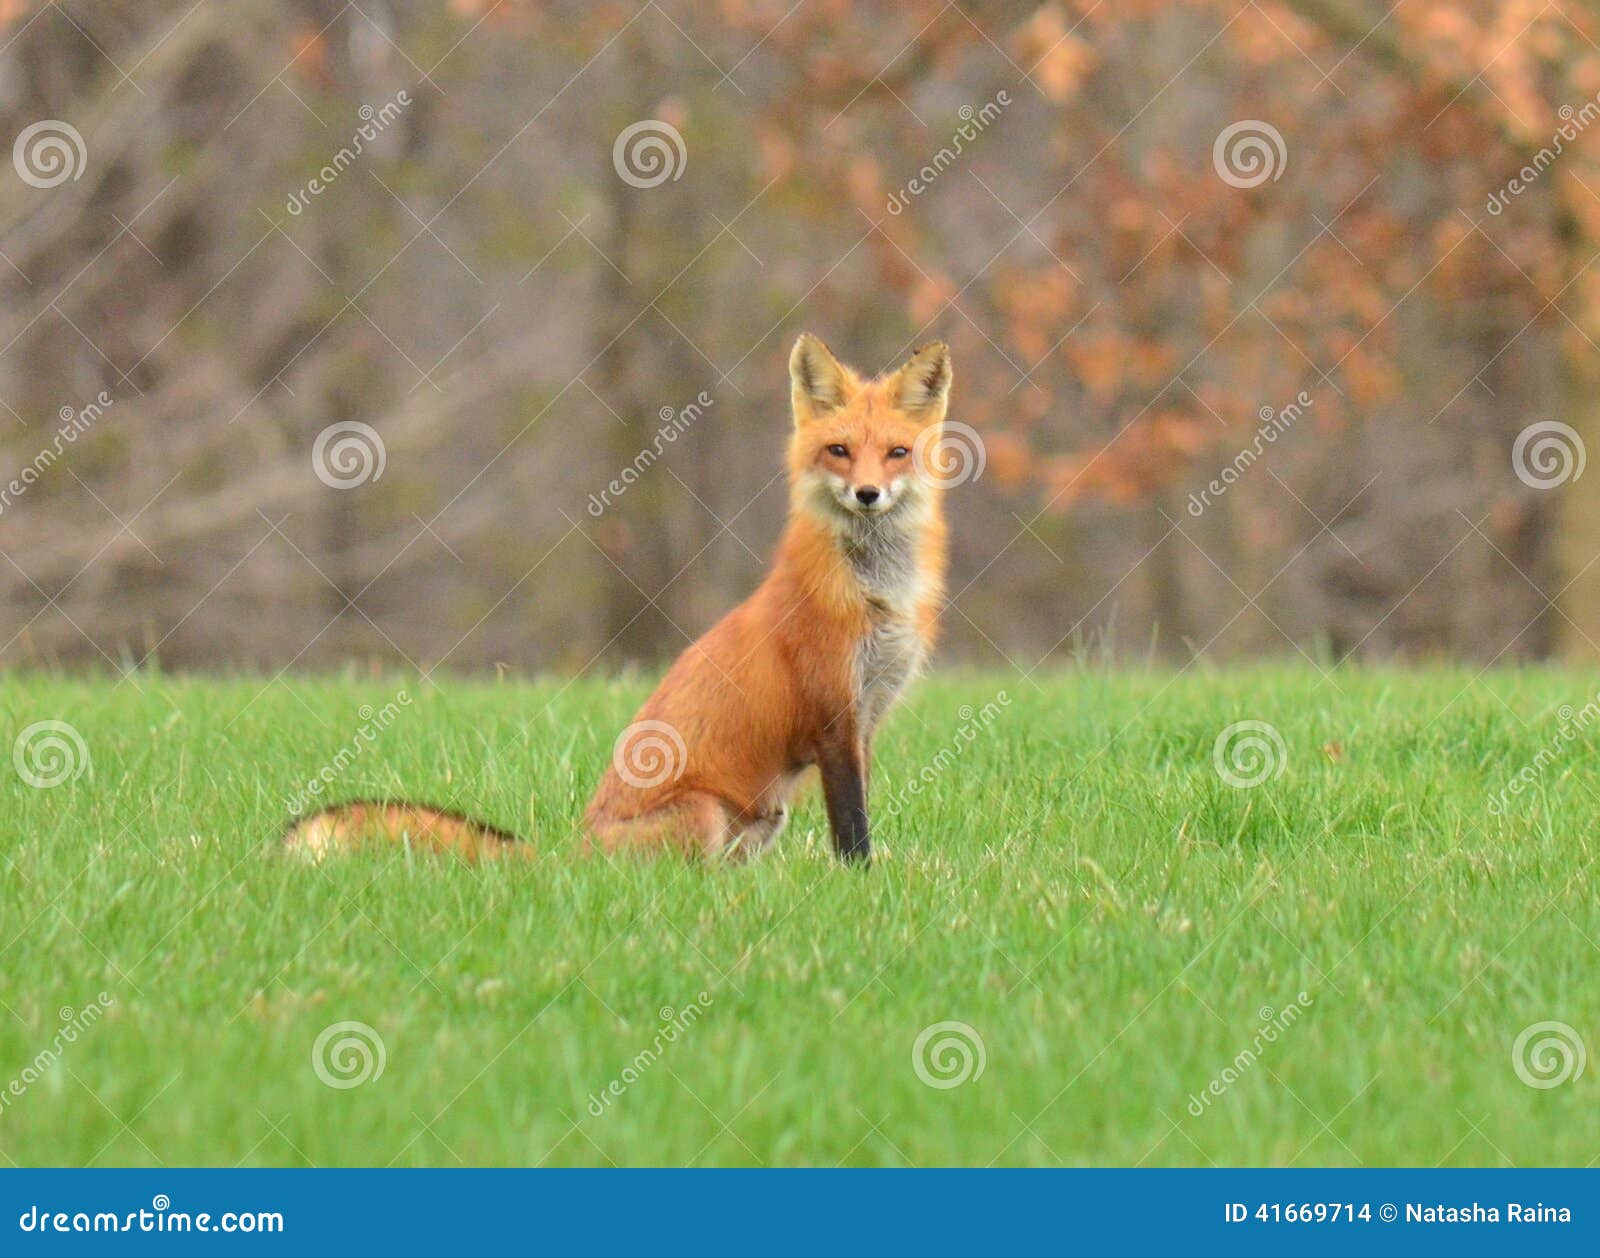 female red fox or vixen in nature